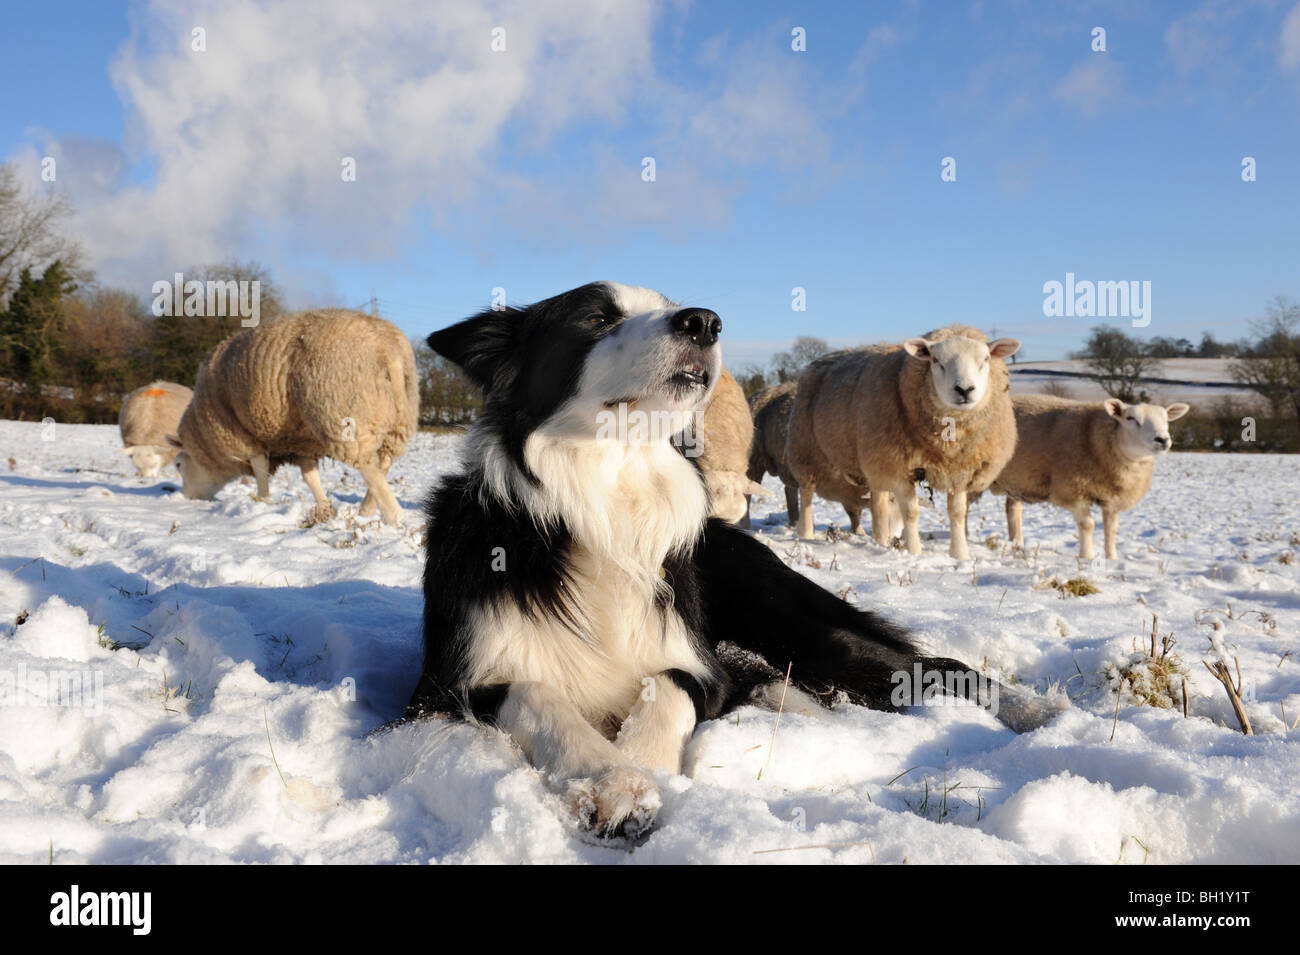 Border Collie sheep dog and Sheep in the snow Stock Photo